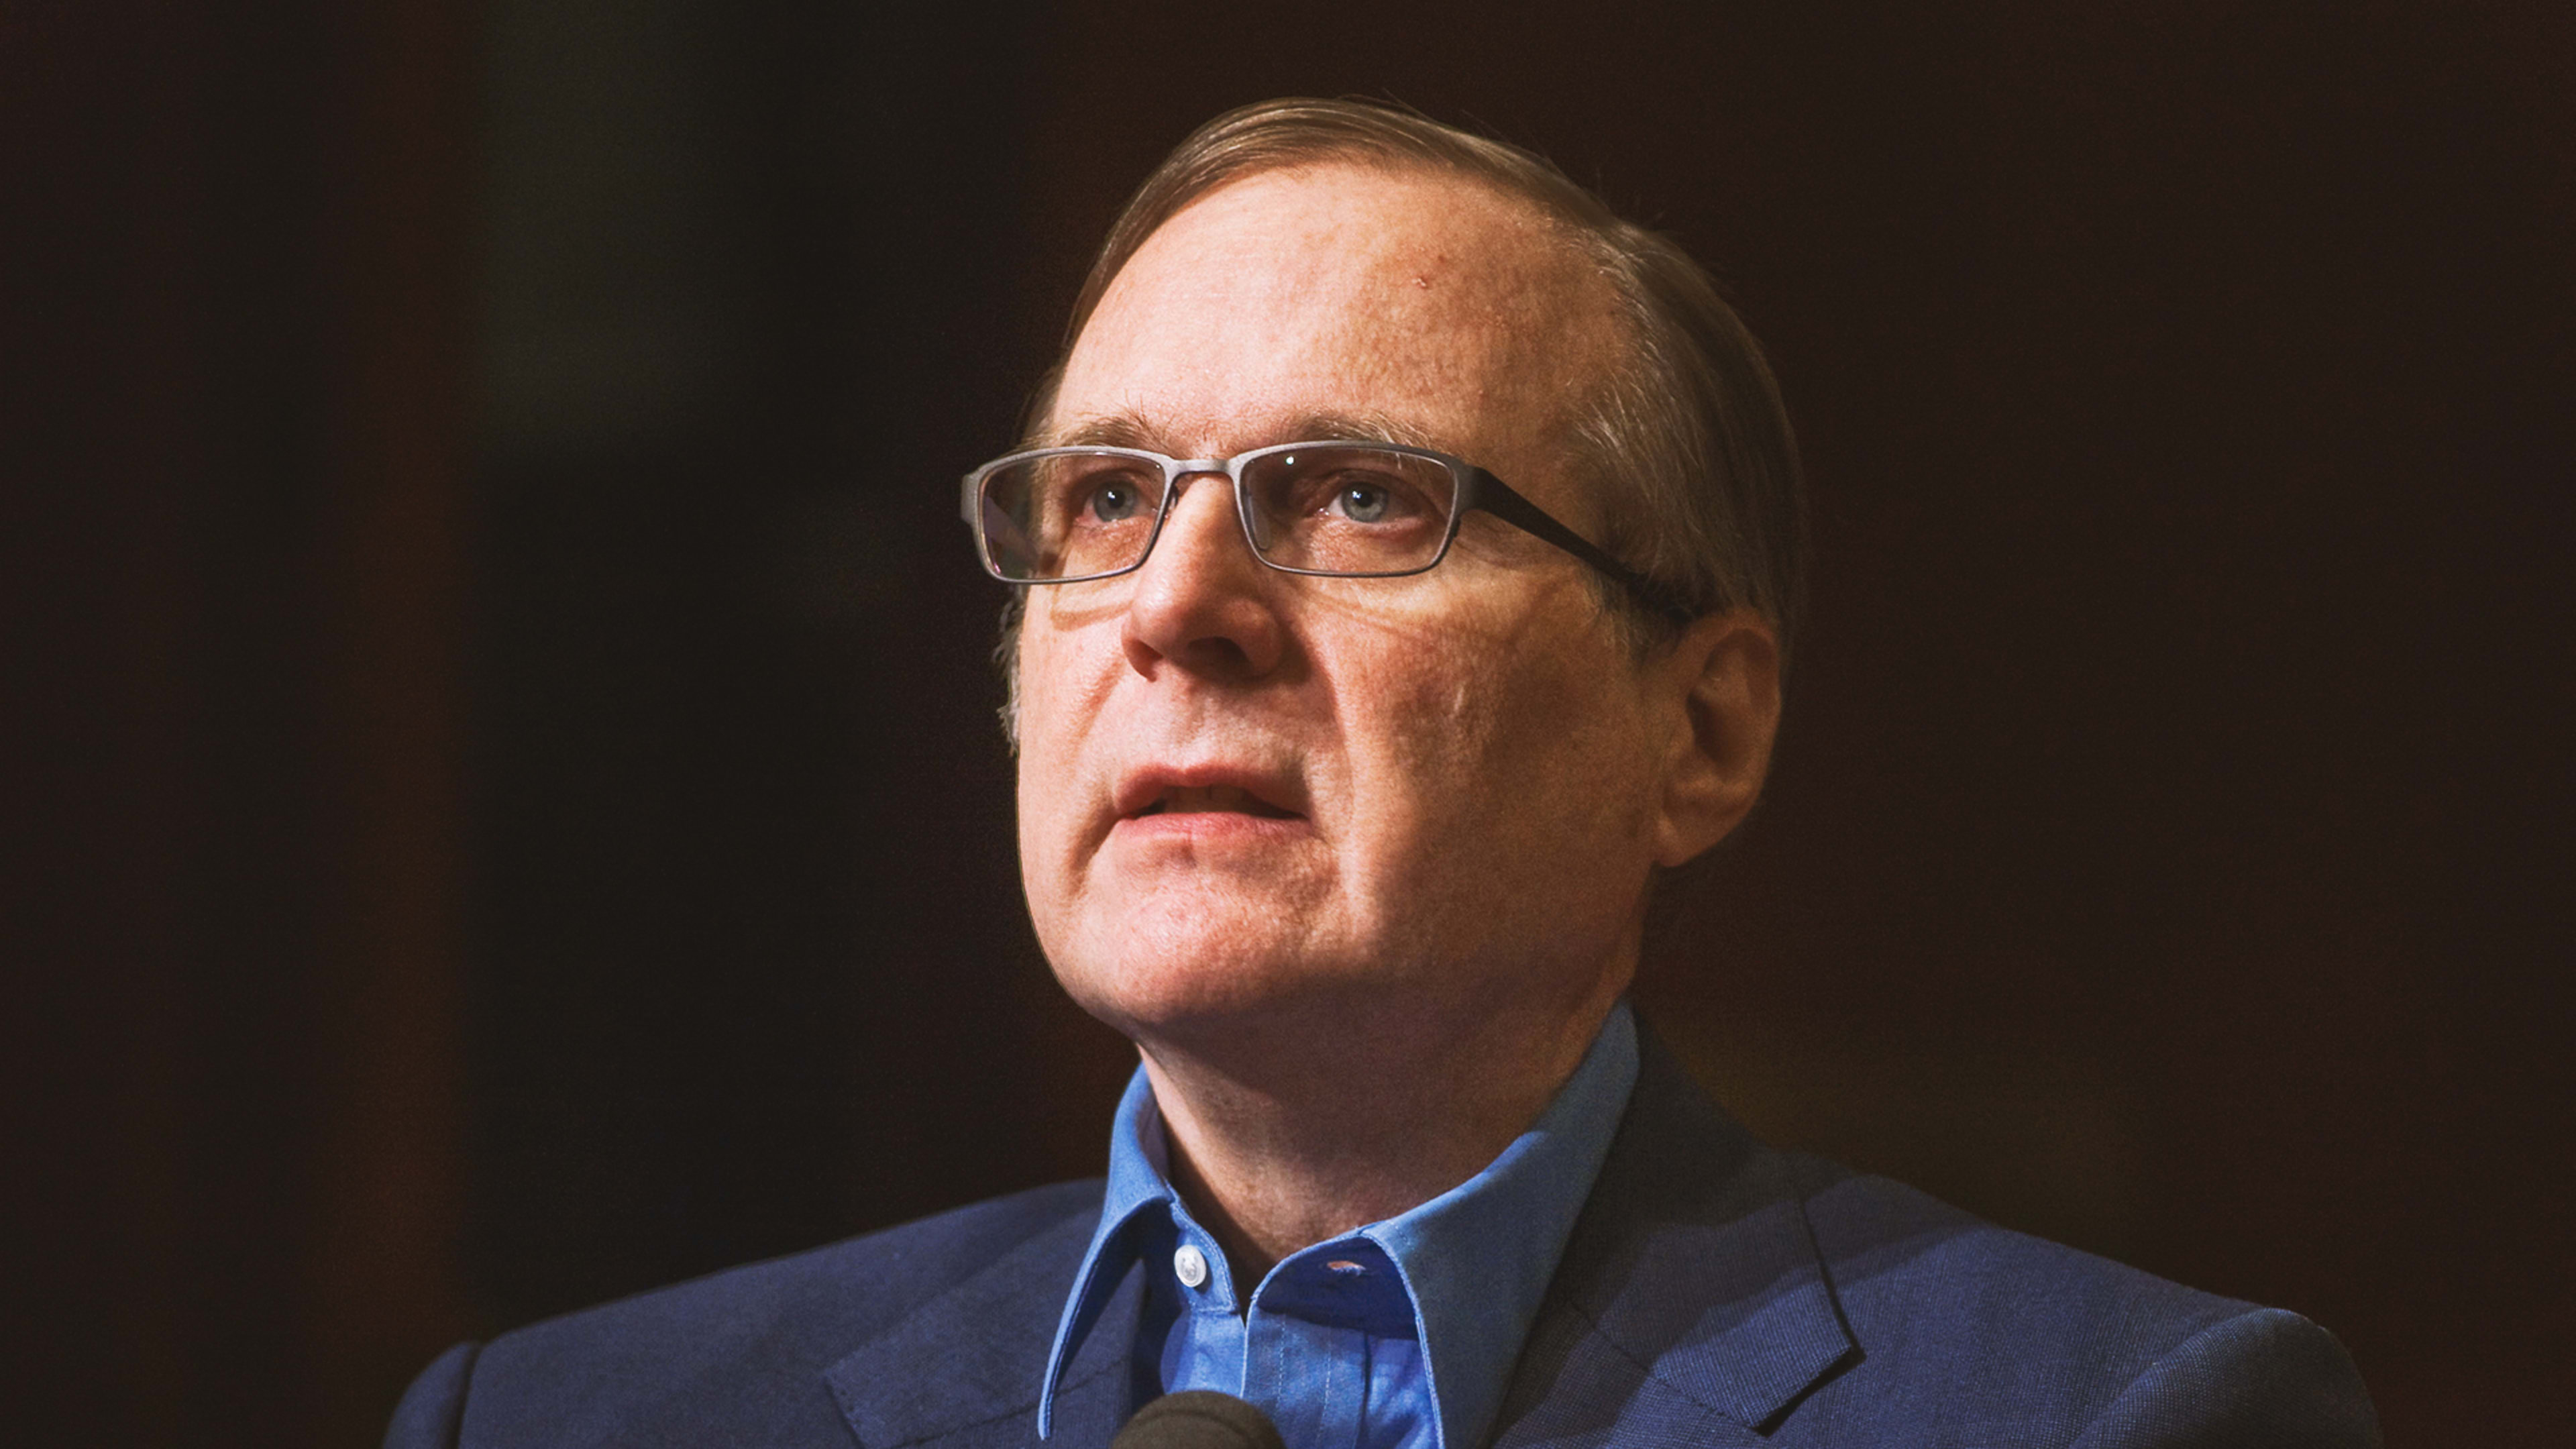 Paul Allen, 1953-2018: Microsoft’s cofounder and so much more